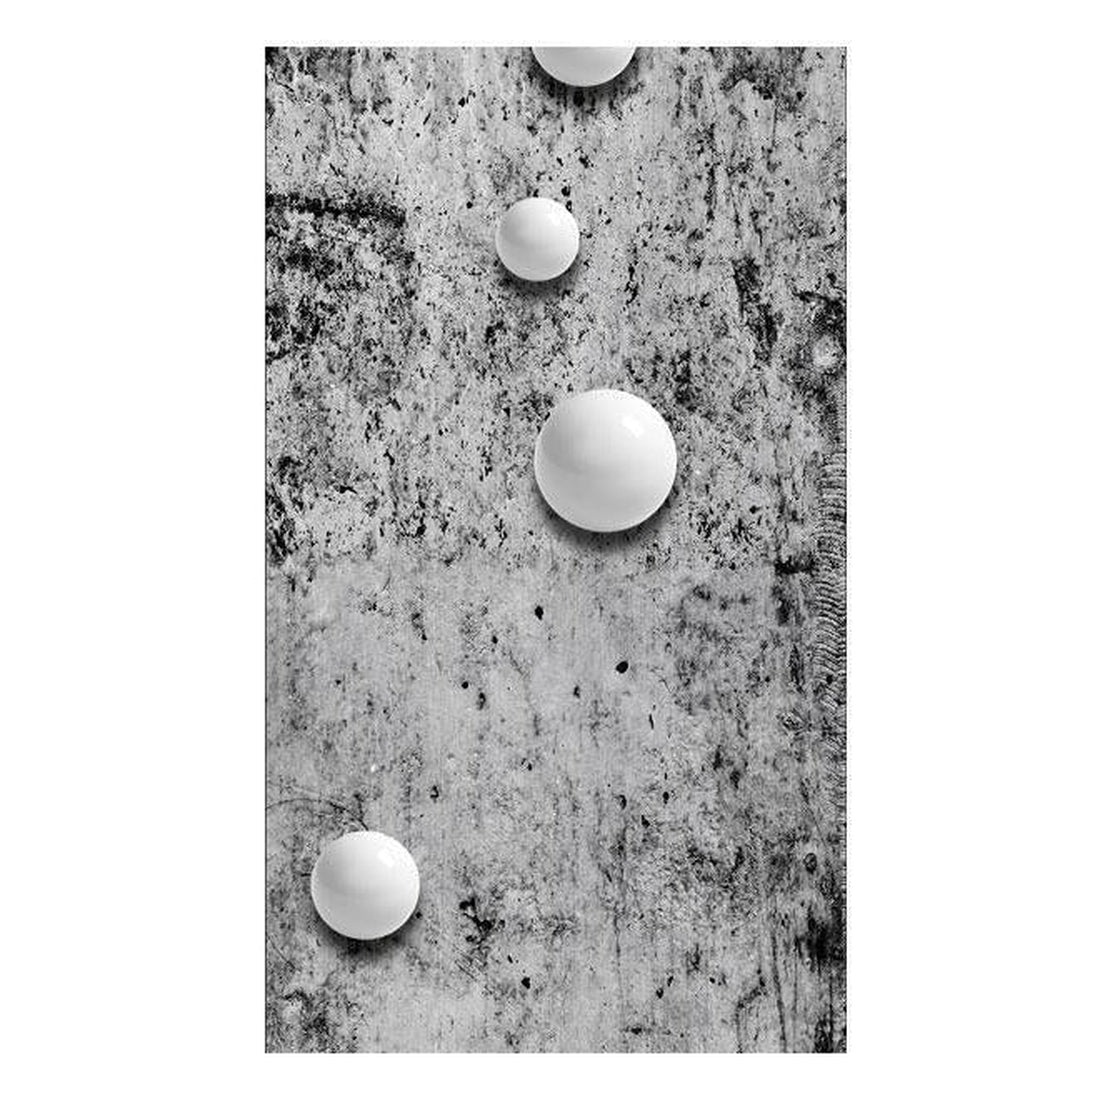 Wall mural - Pearls on Concrete-TipTopHomeDecor